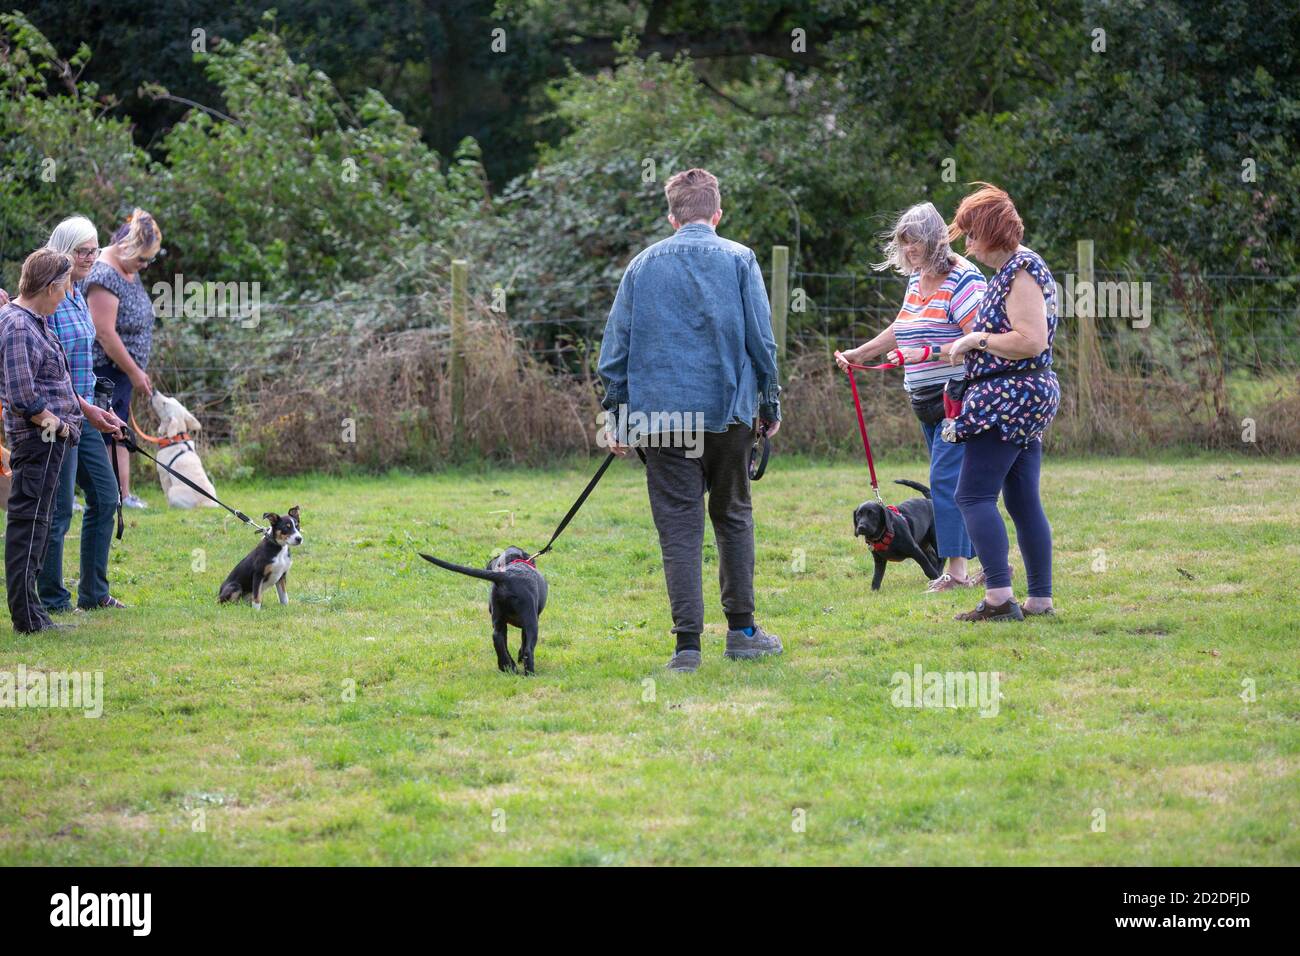 Dog Training Class, Introducing strange dogs to one another. Socialiazation. Stock Photo